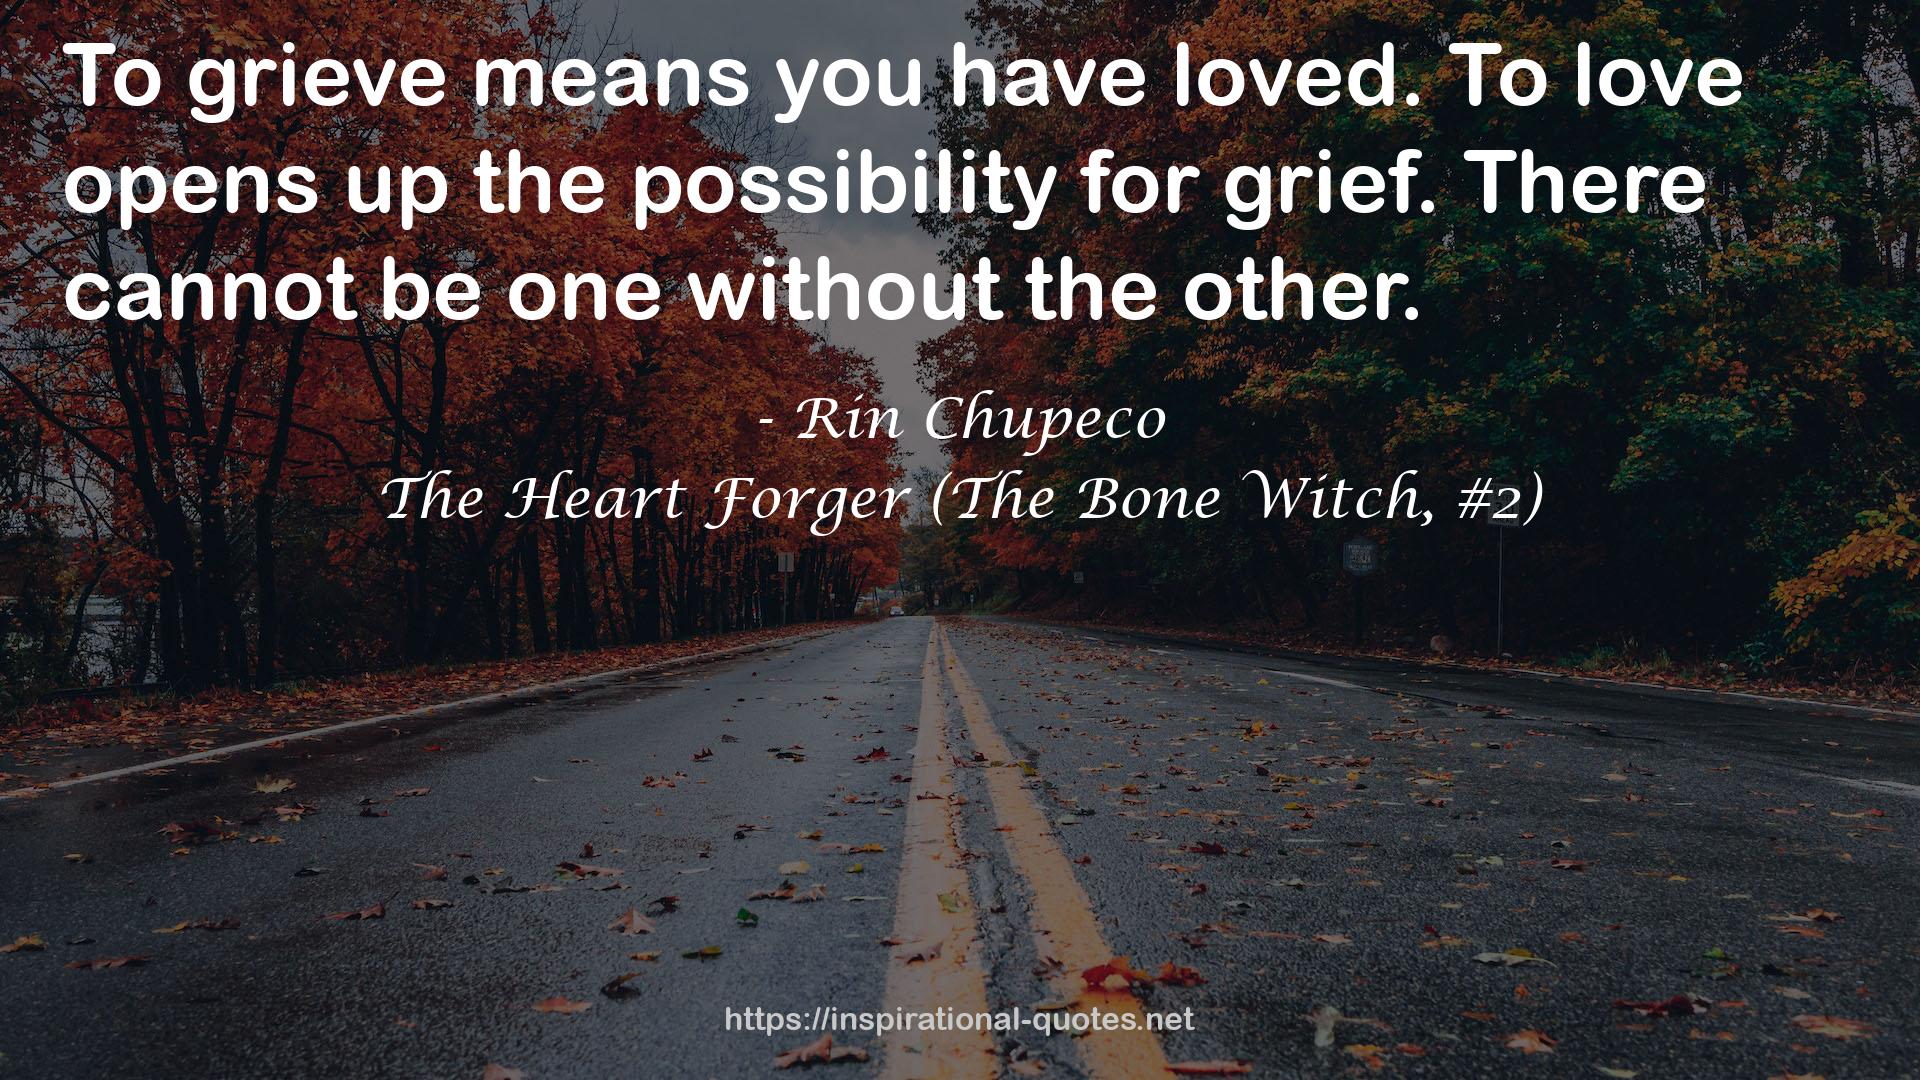 The Heart Forger (The Bone Witch, #2) QUOTES